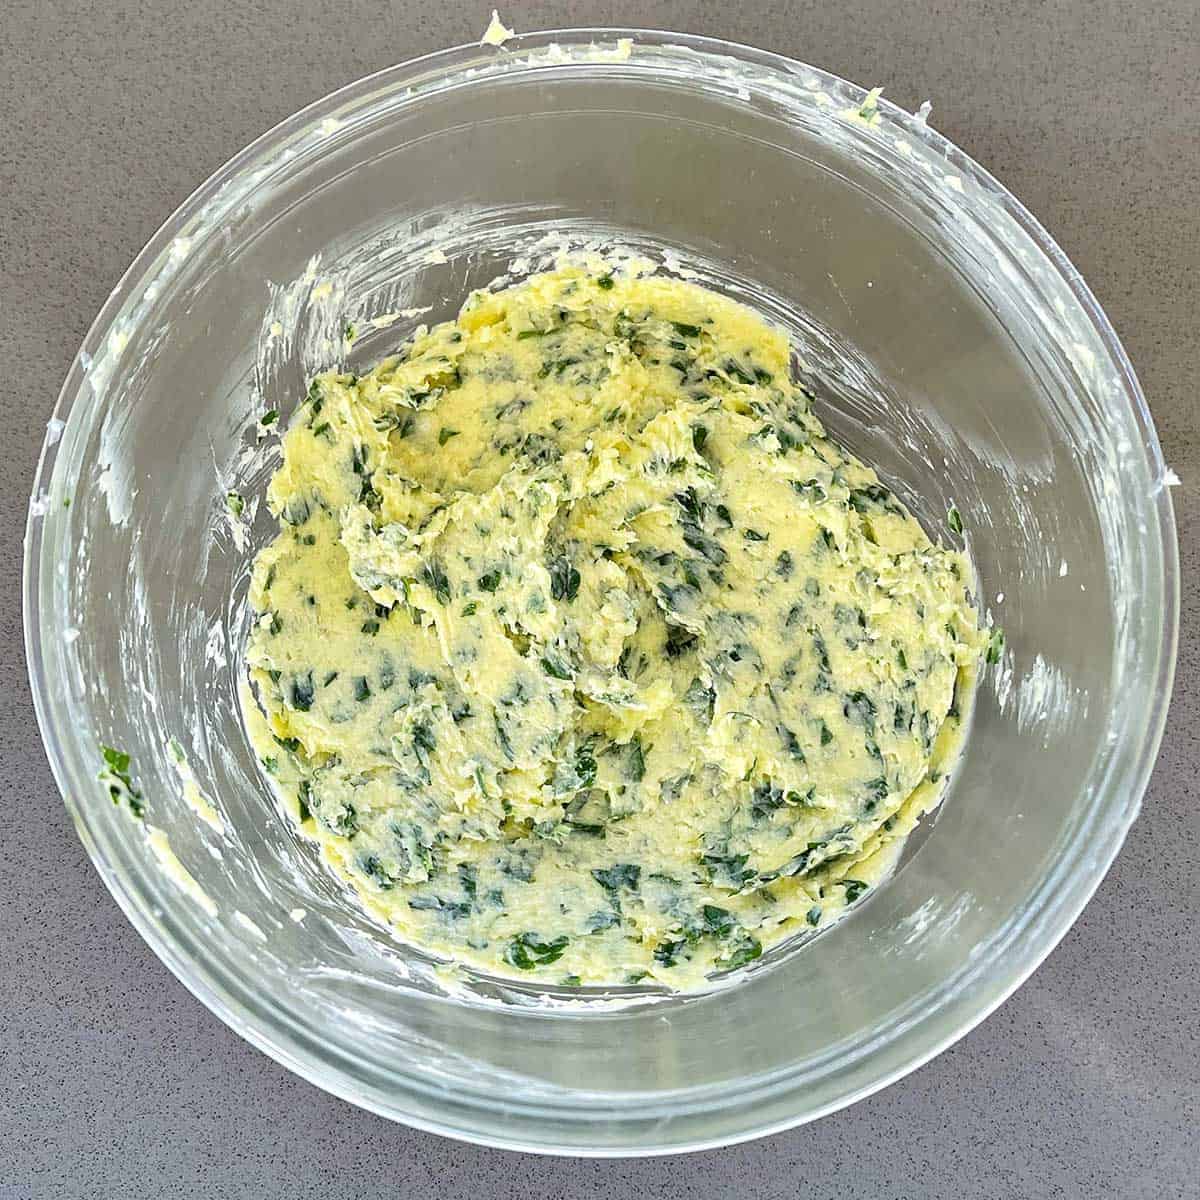 Garlic butter in a glass bowl on a grey bench.